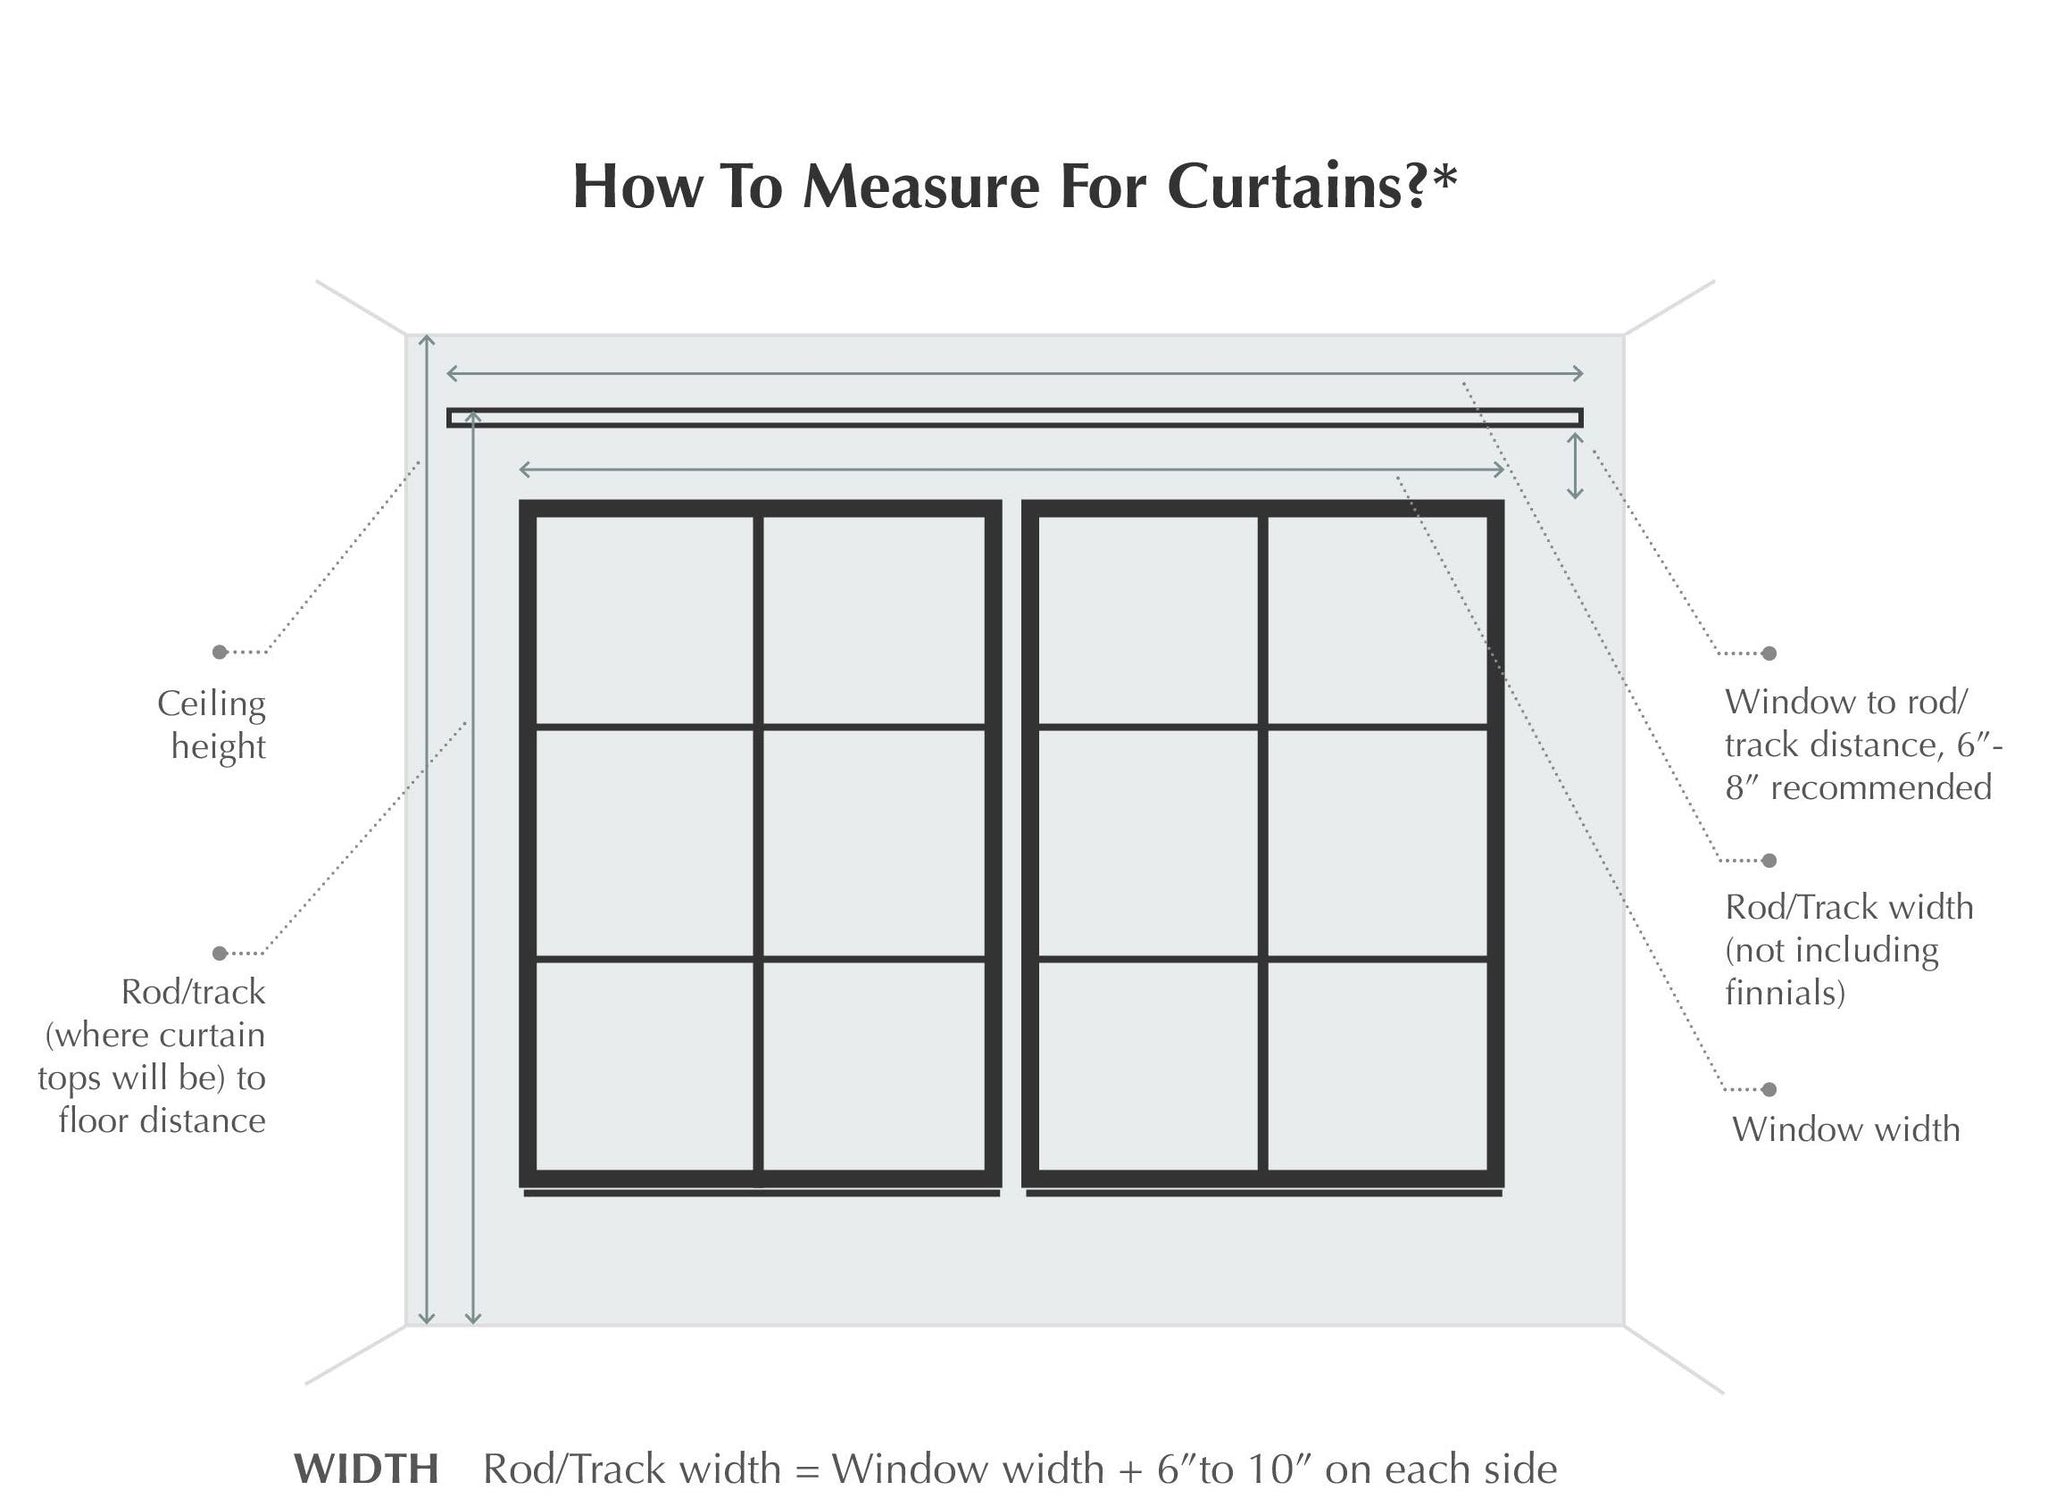 How to measure for curtains?